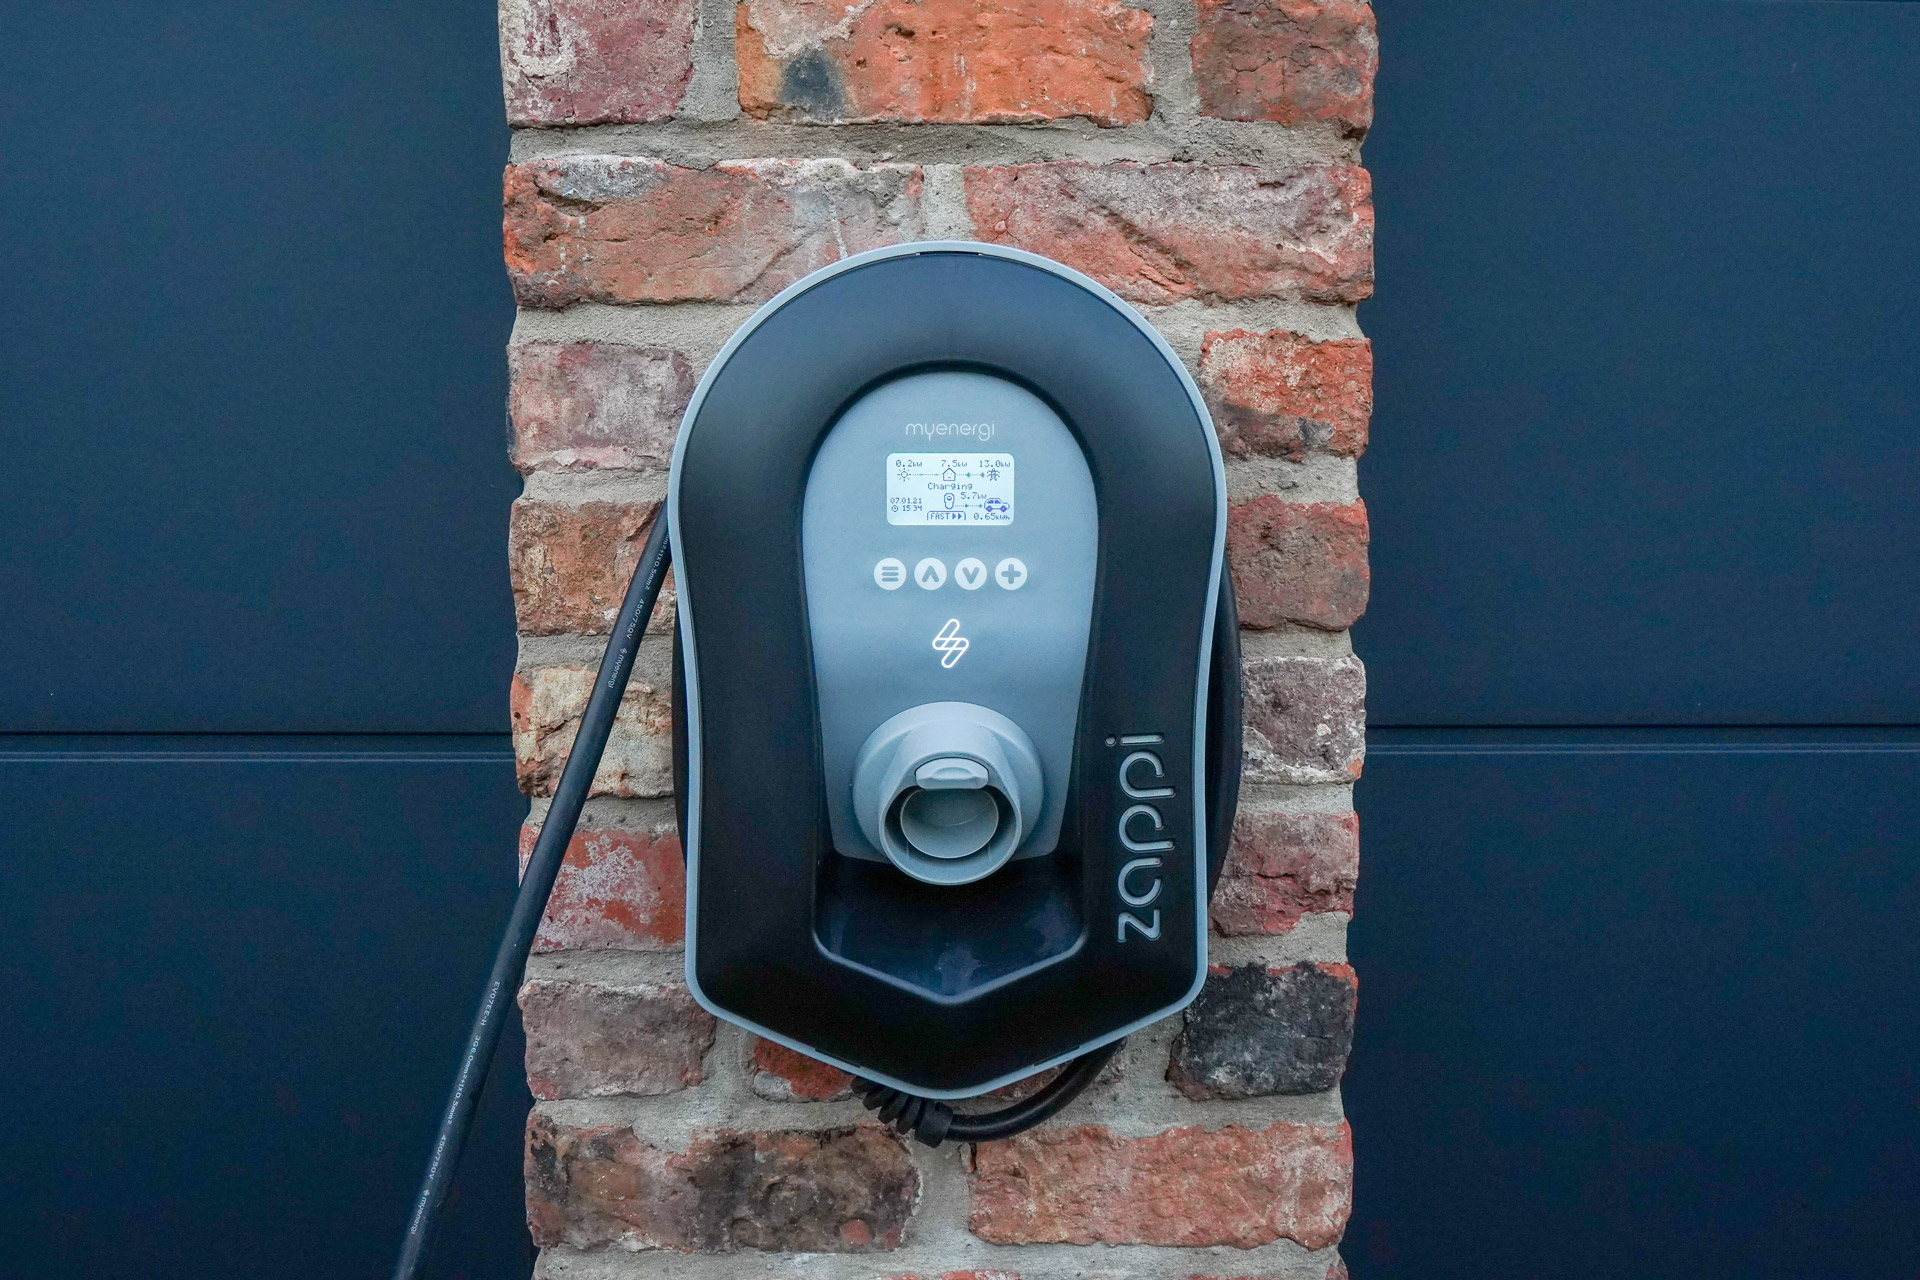 Wall-mounted electric car charger